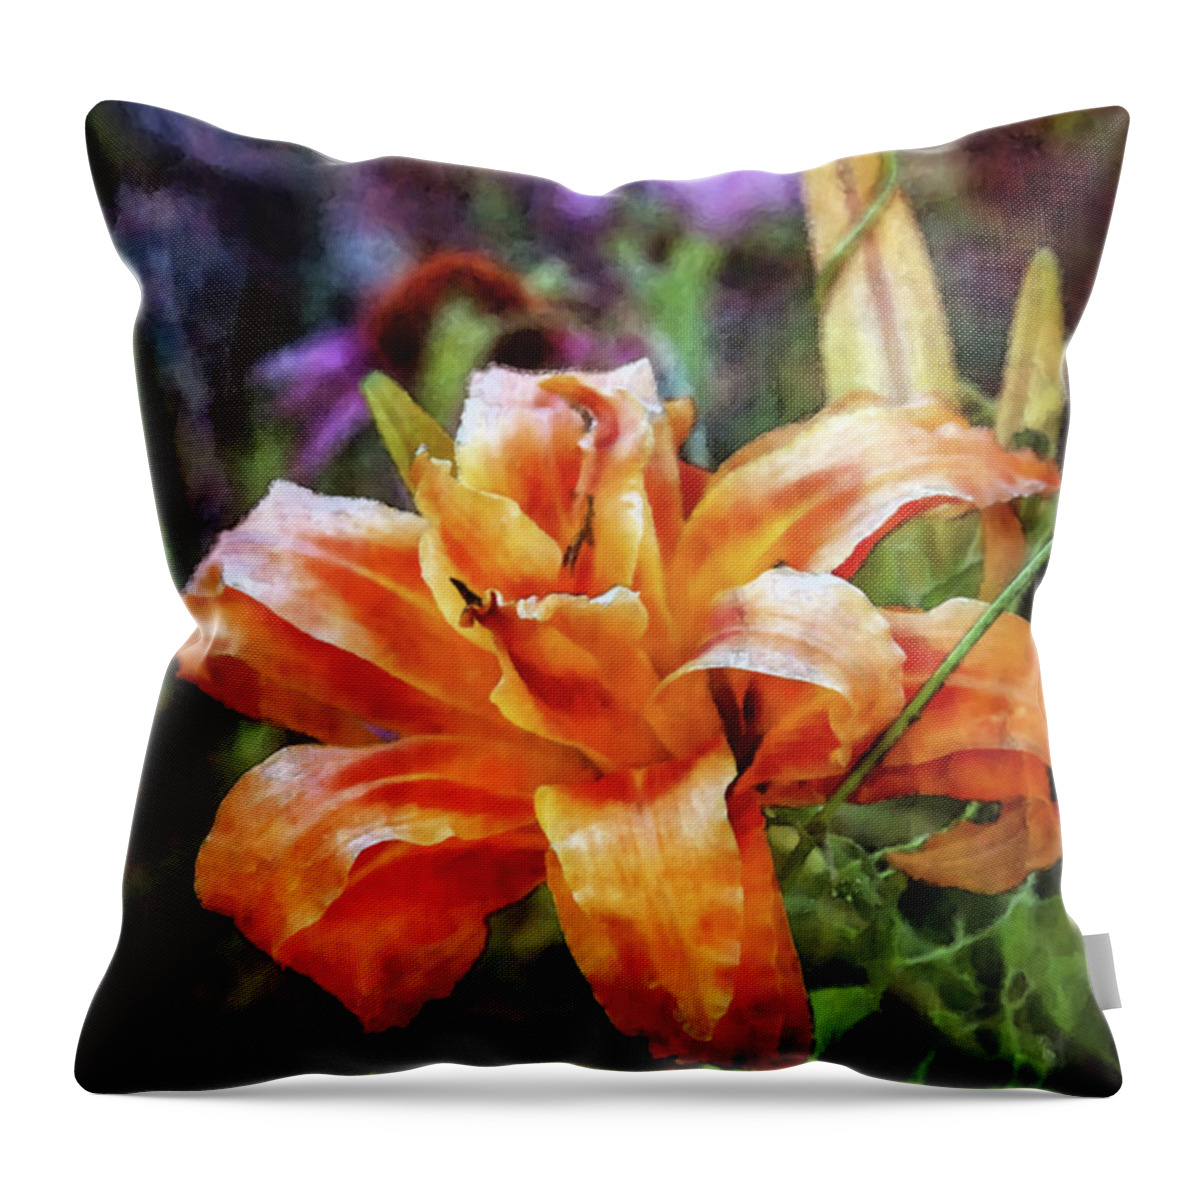 Impressionist Throw Pillow featuring the photograph Restrained 3649 IDP_2 by Steven Ward